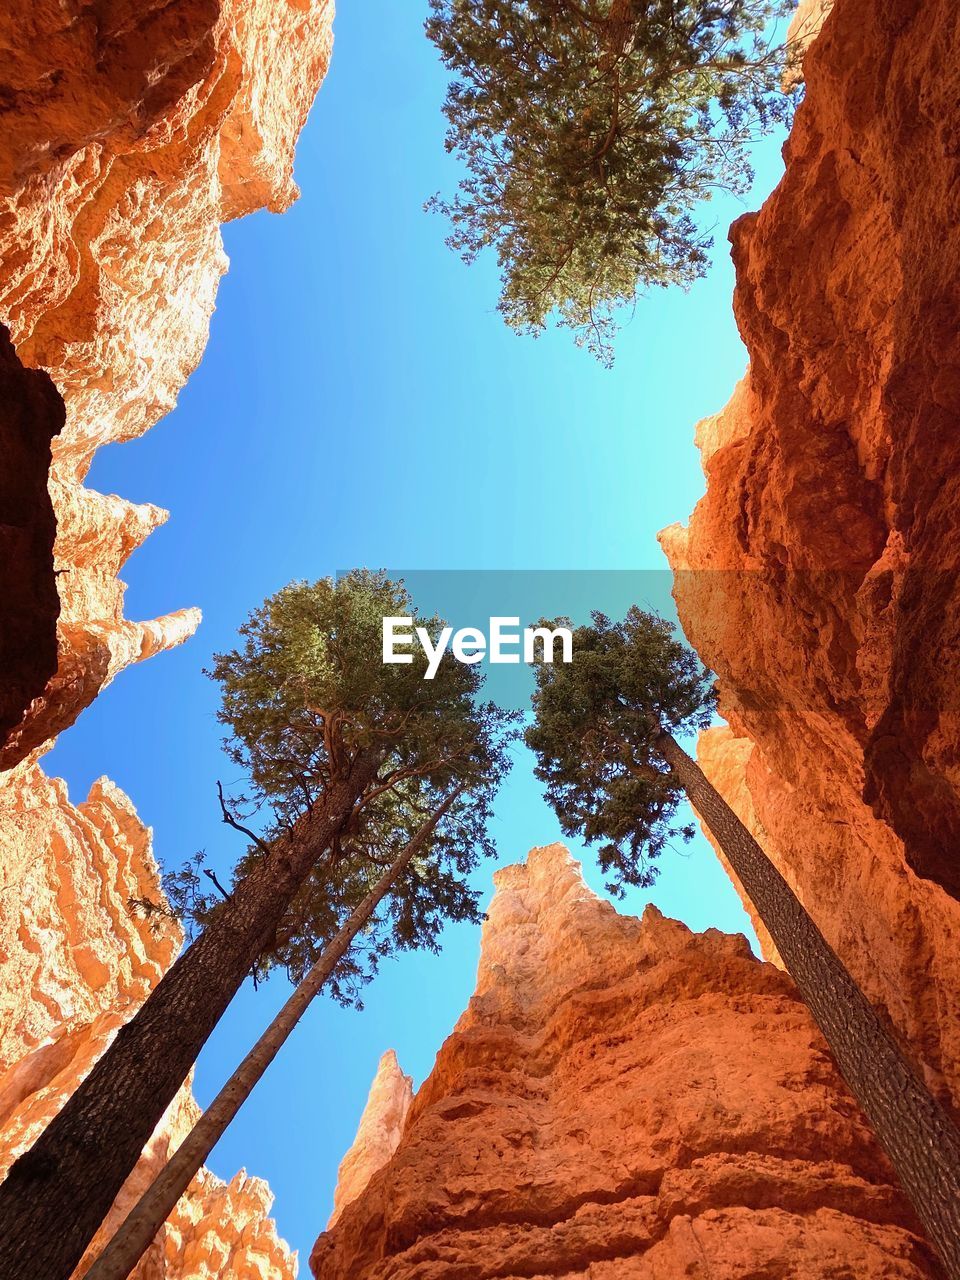 A corner in bryce canyon